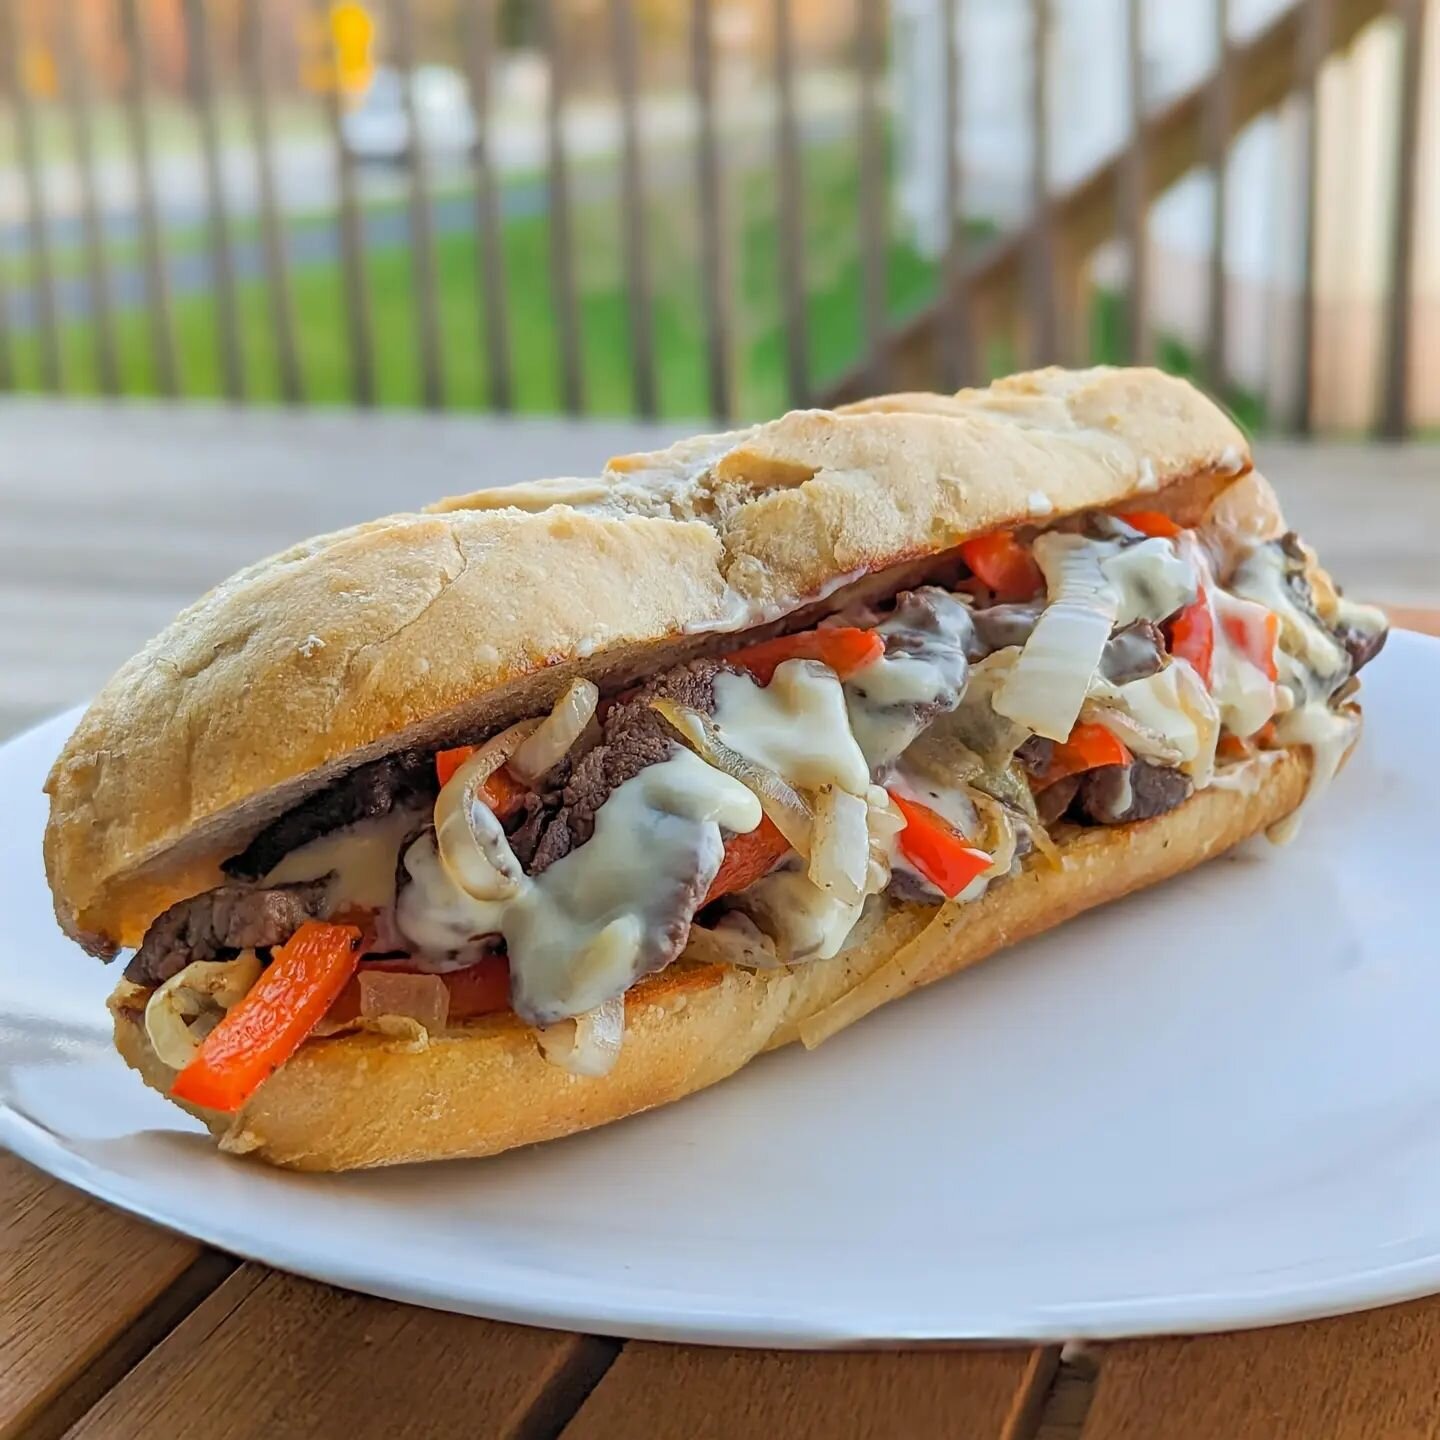 And this is why I enjoy late sunsets, perfect lighting for my food photography 🤌 made philly cheesesteaks